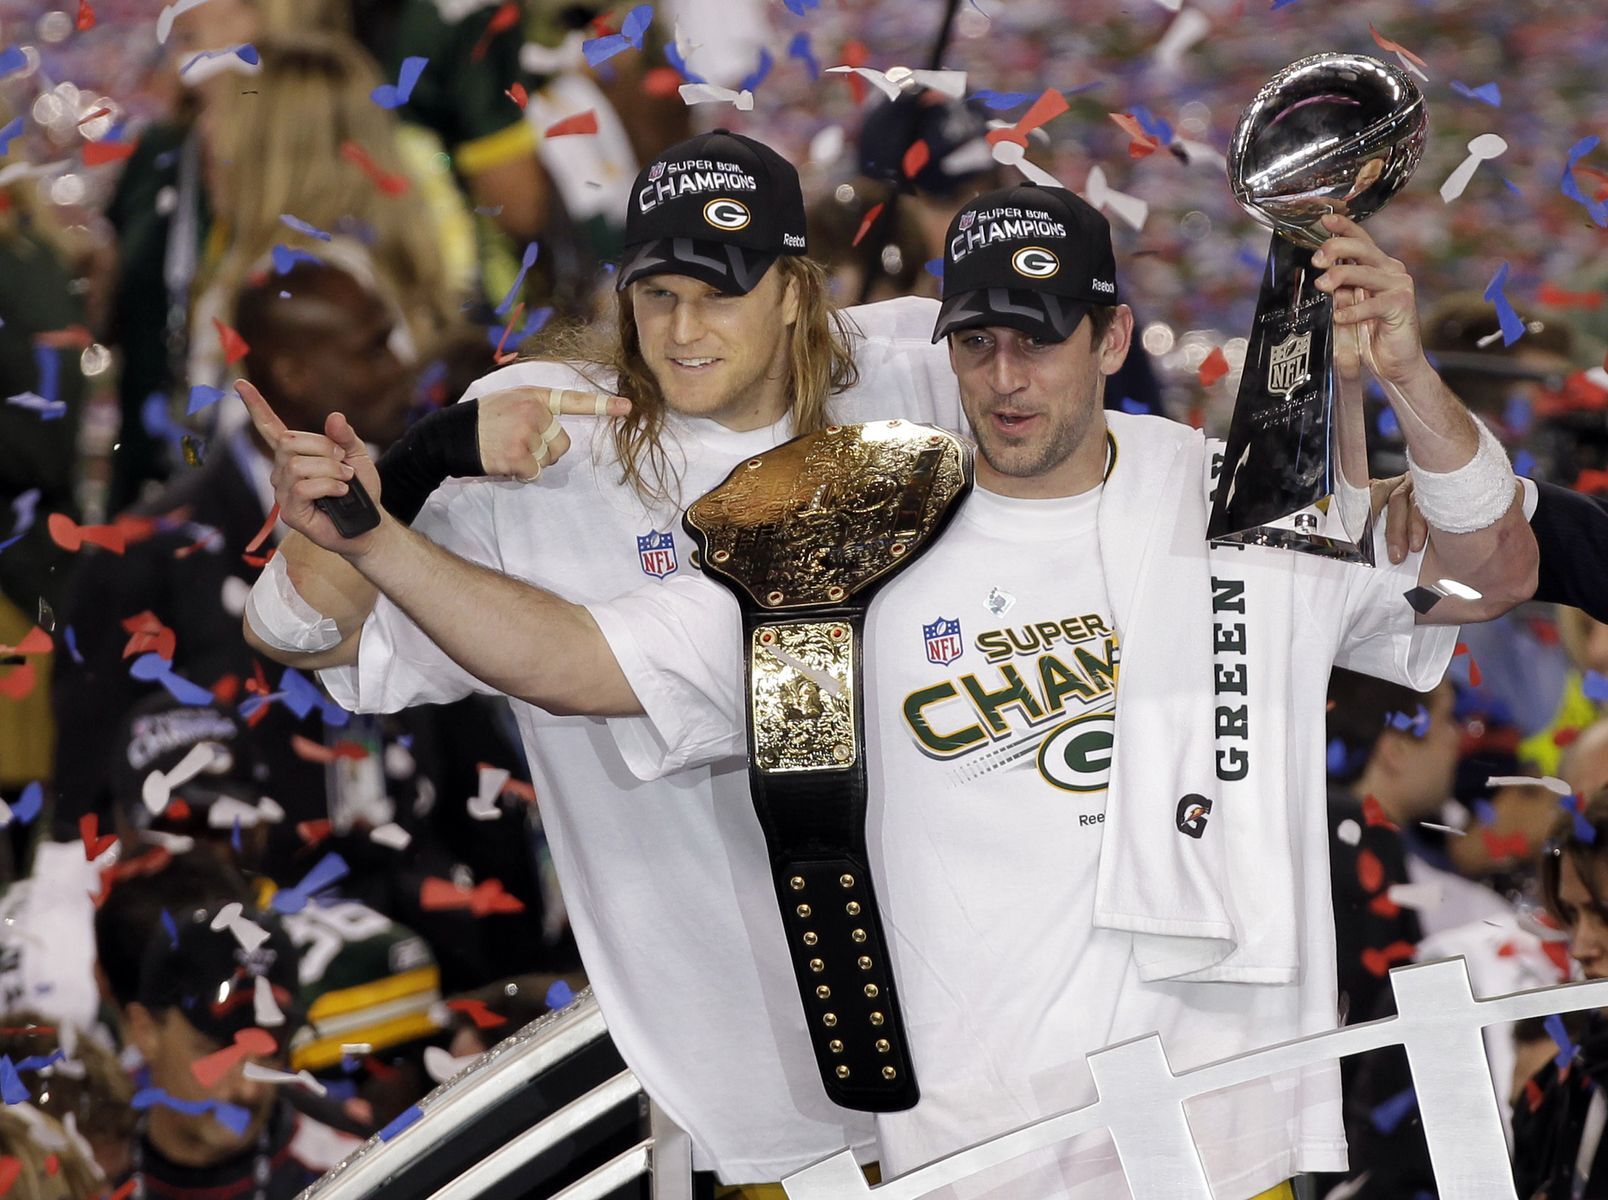 The mostwatched Super Bowl events of all time